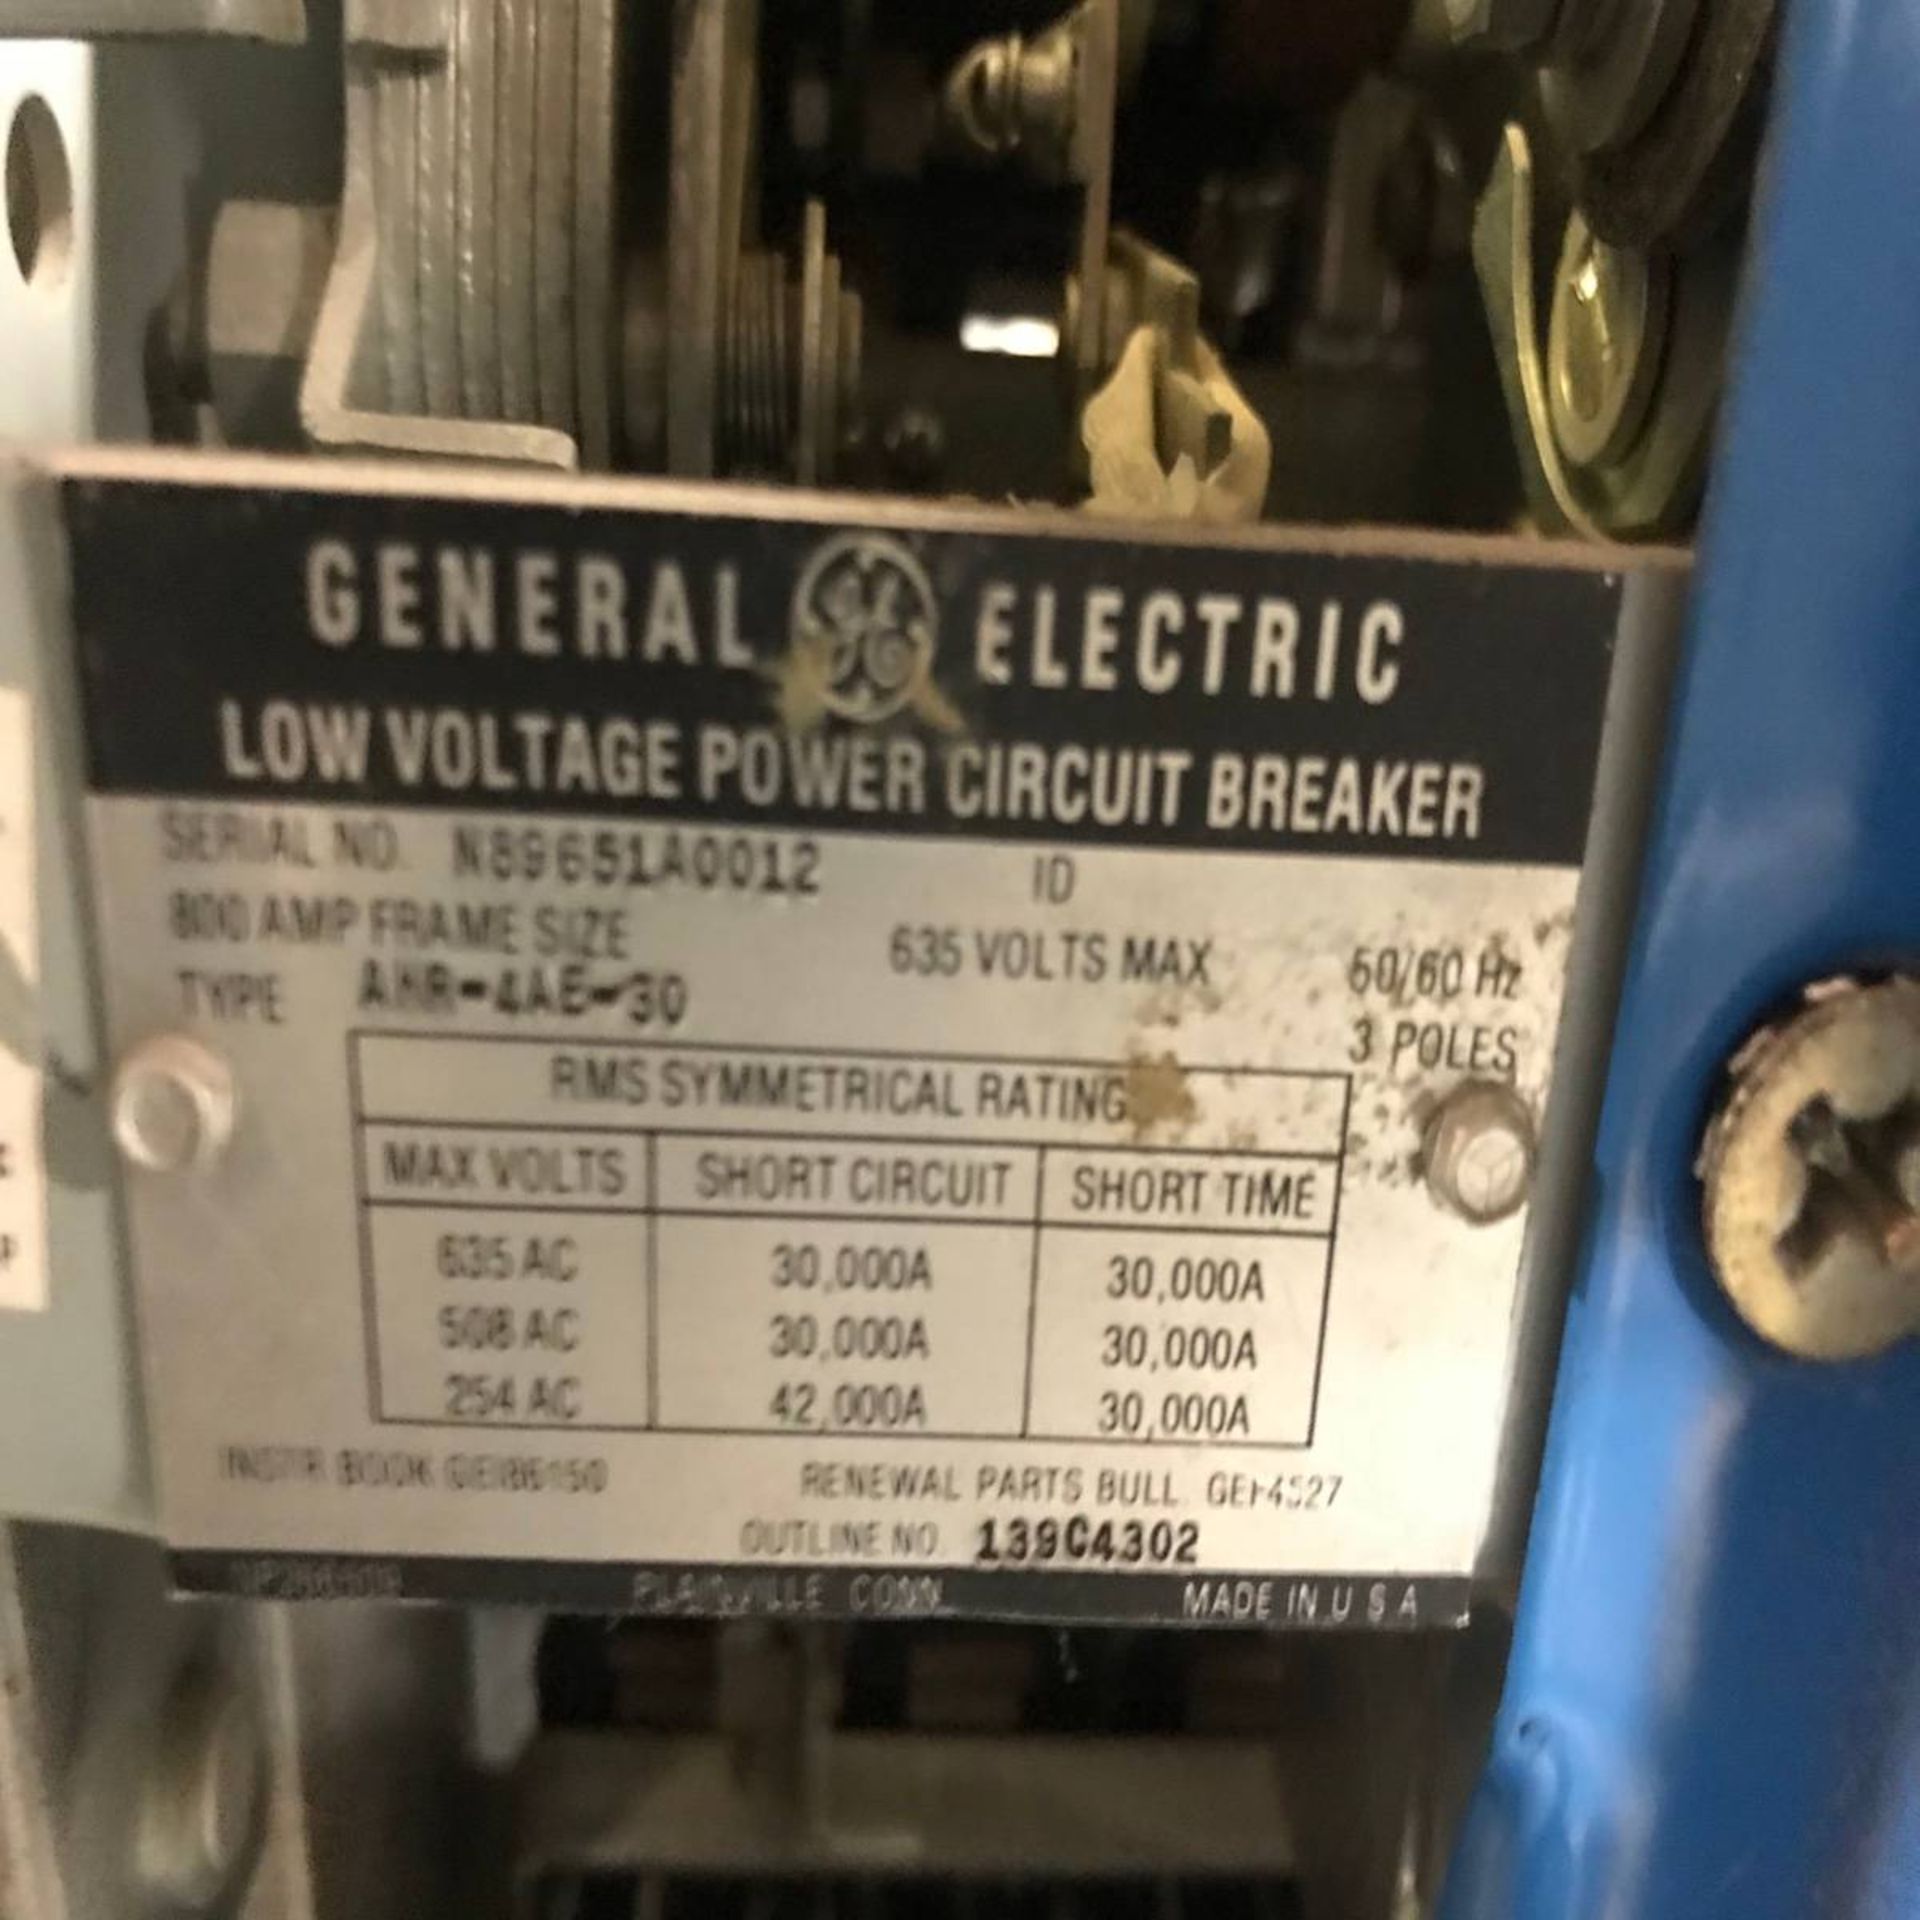 General Electric AKR-4AE-30 Low Voltage Power Circuit Breaker - Image 3 of 4